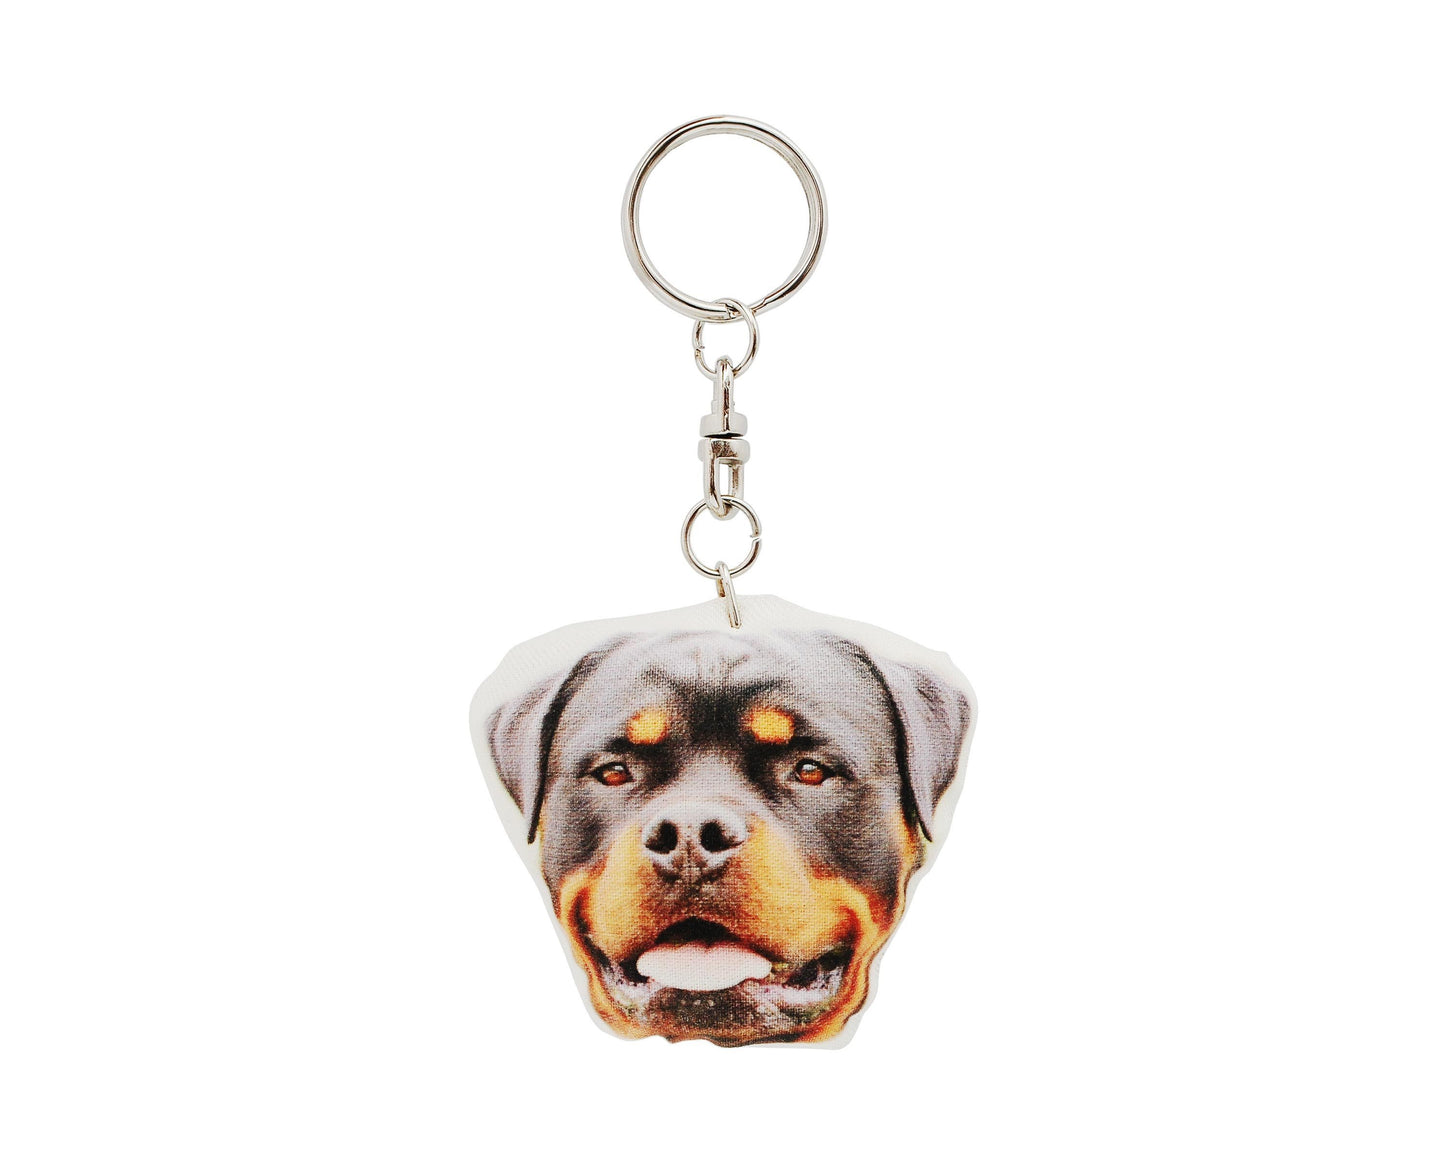 New-Style Fashionable Cute Animal Keychains